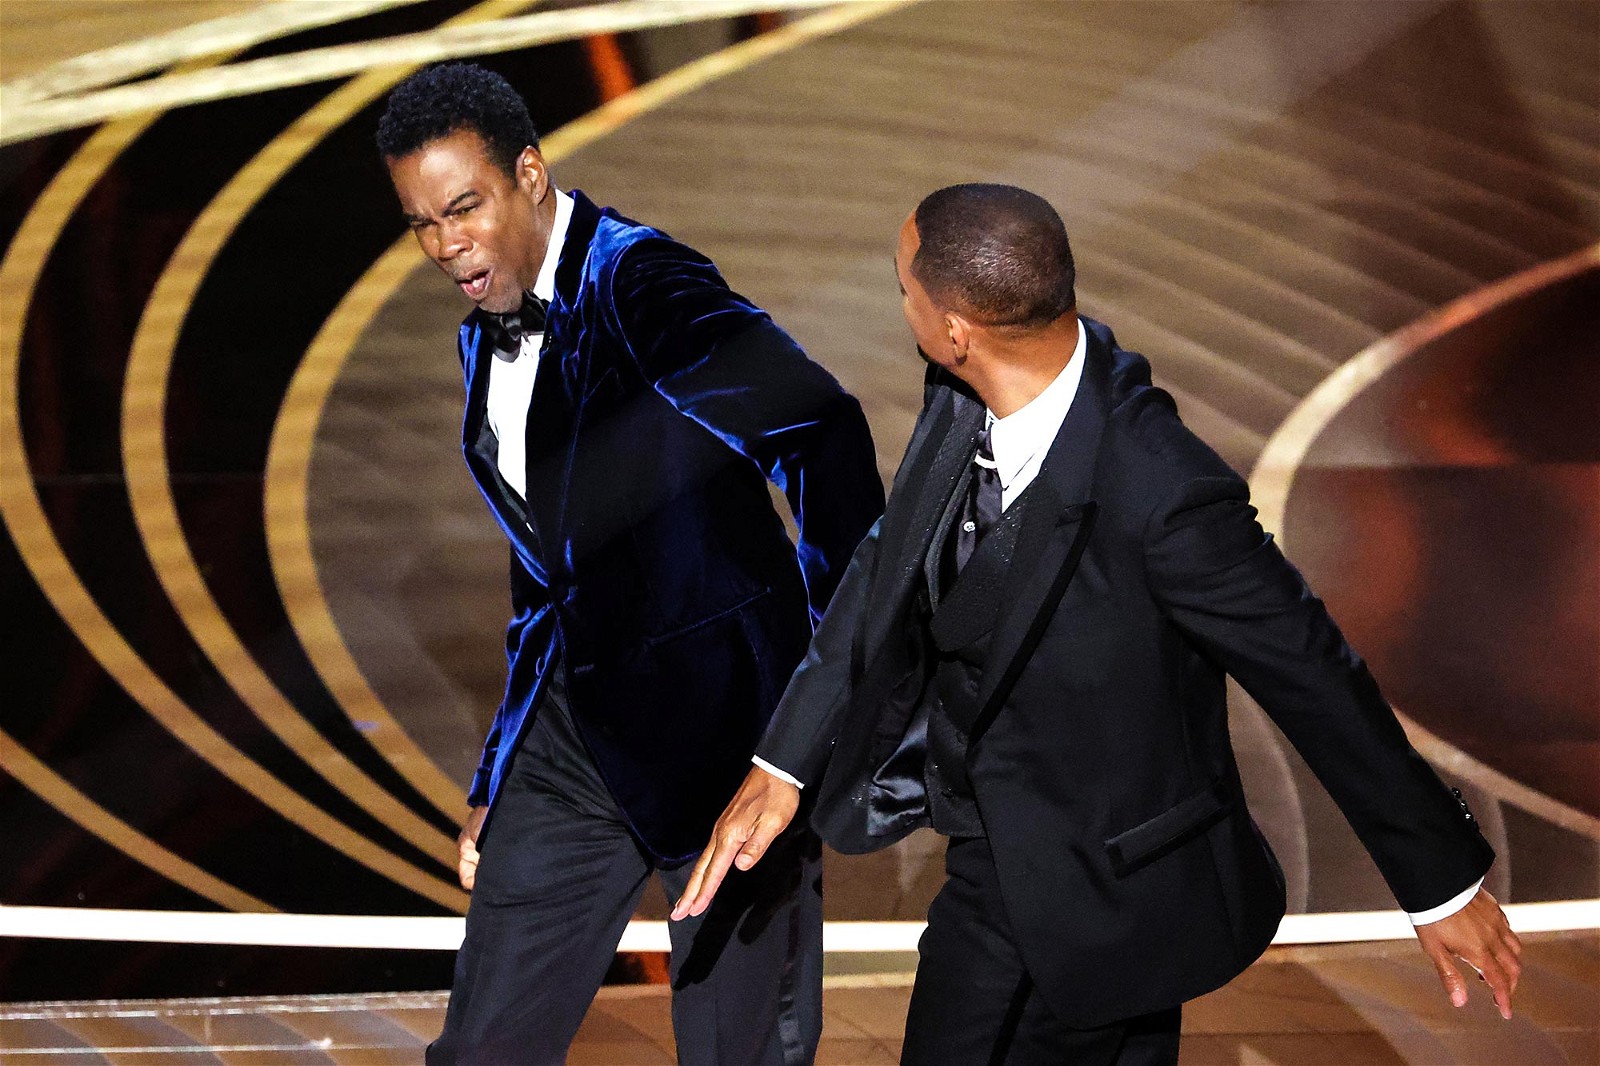 Will Smith slaps Chris Rock on live television during the Oscars 2022